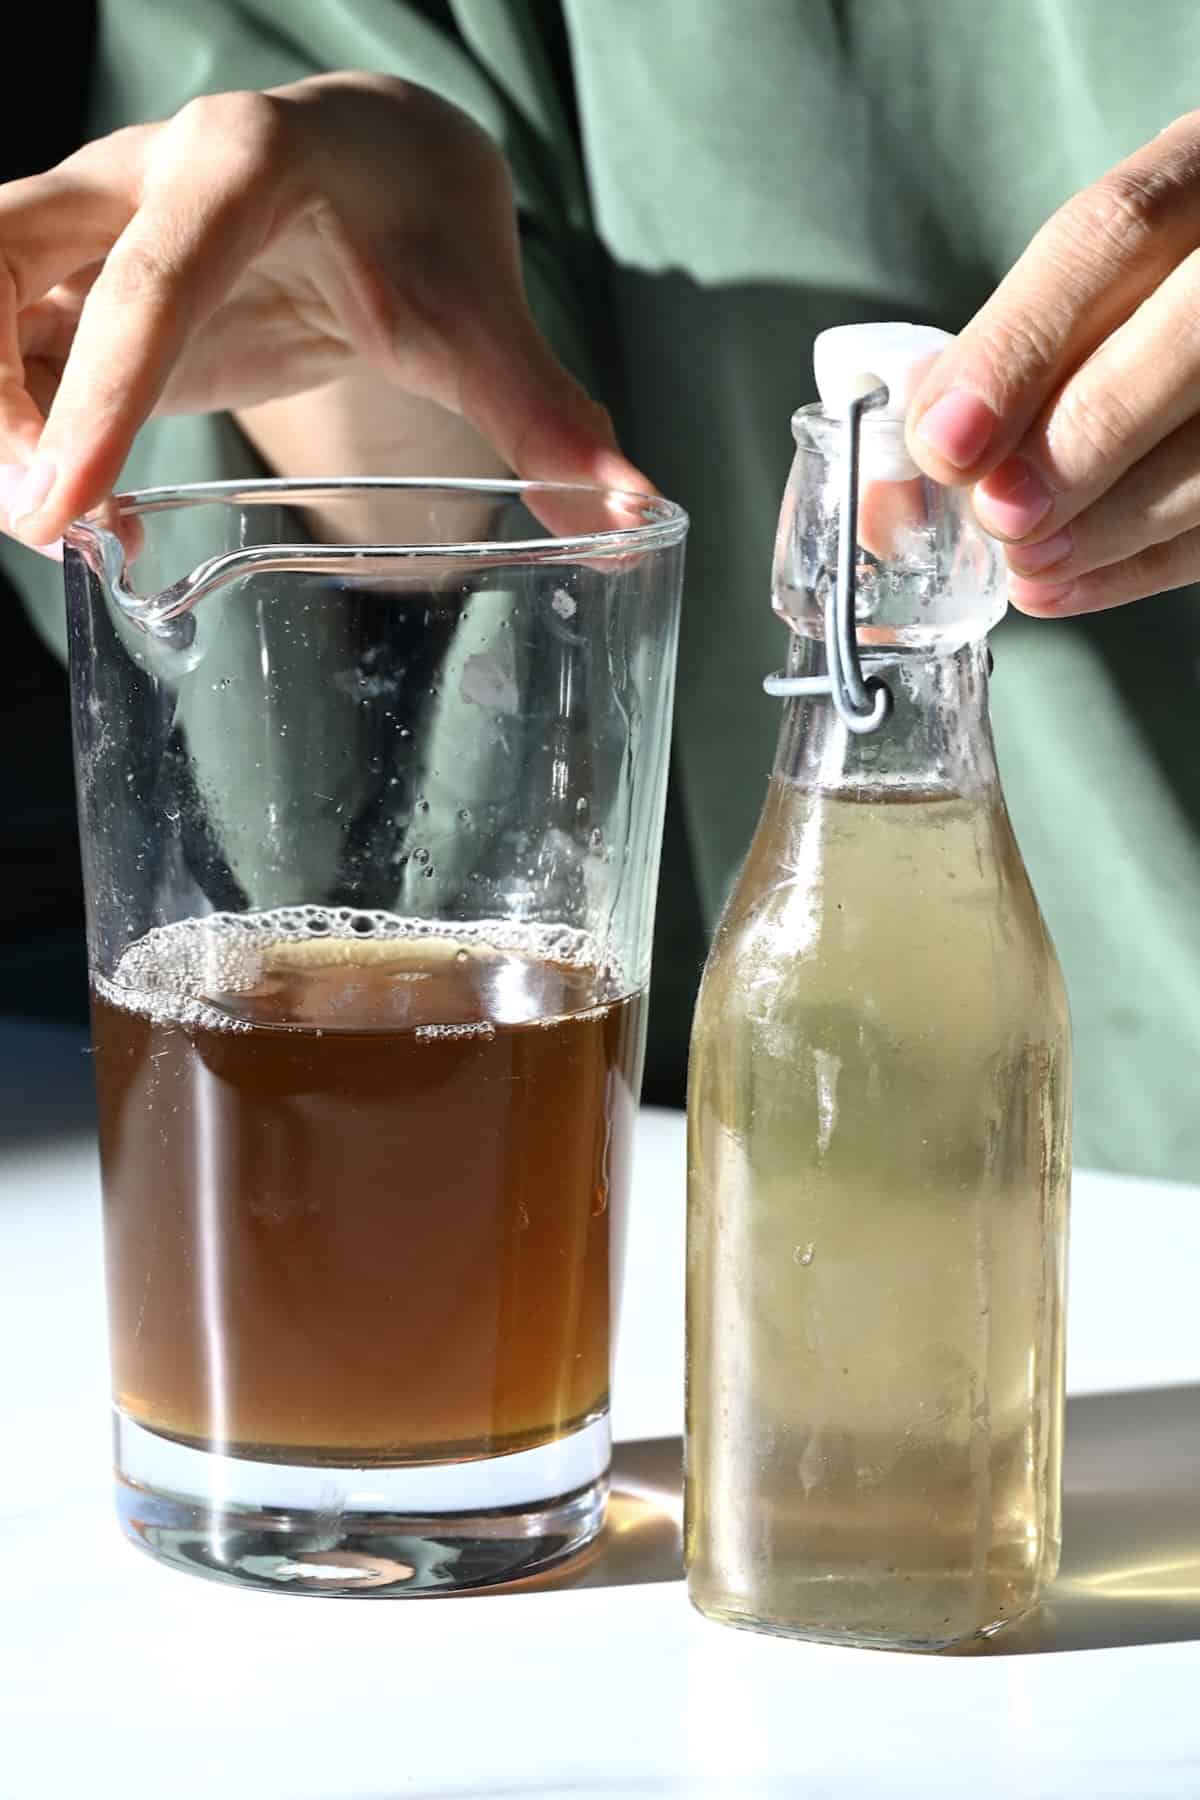 Lavender syrup made with brown sugar and with white sugar